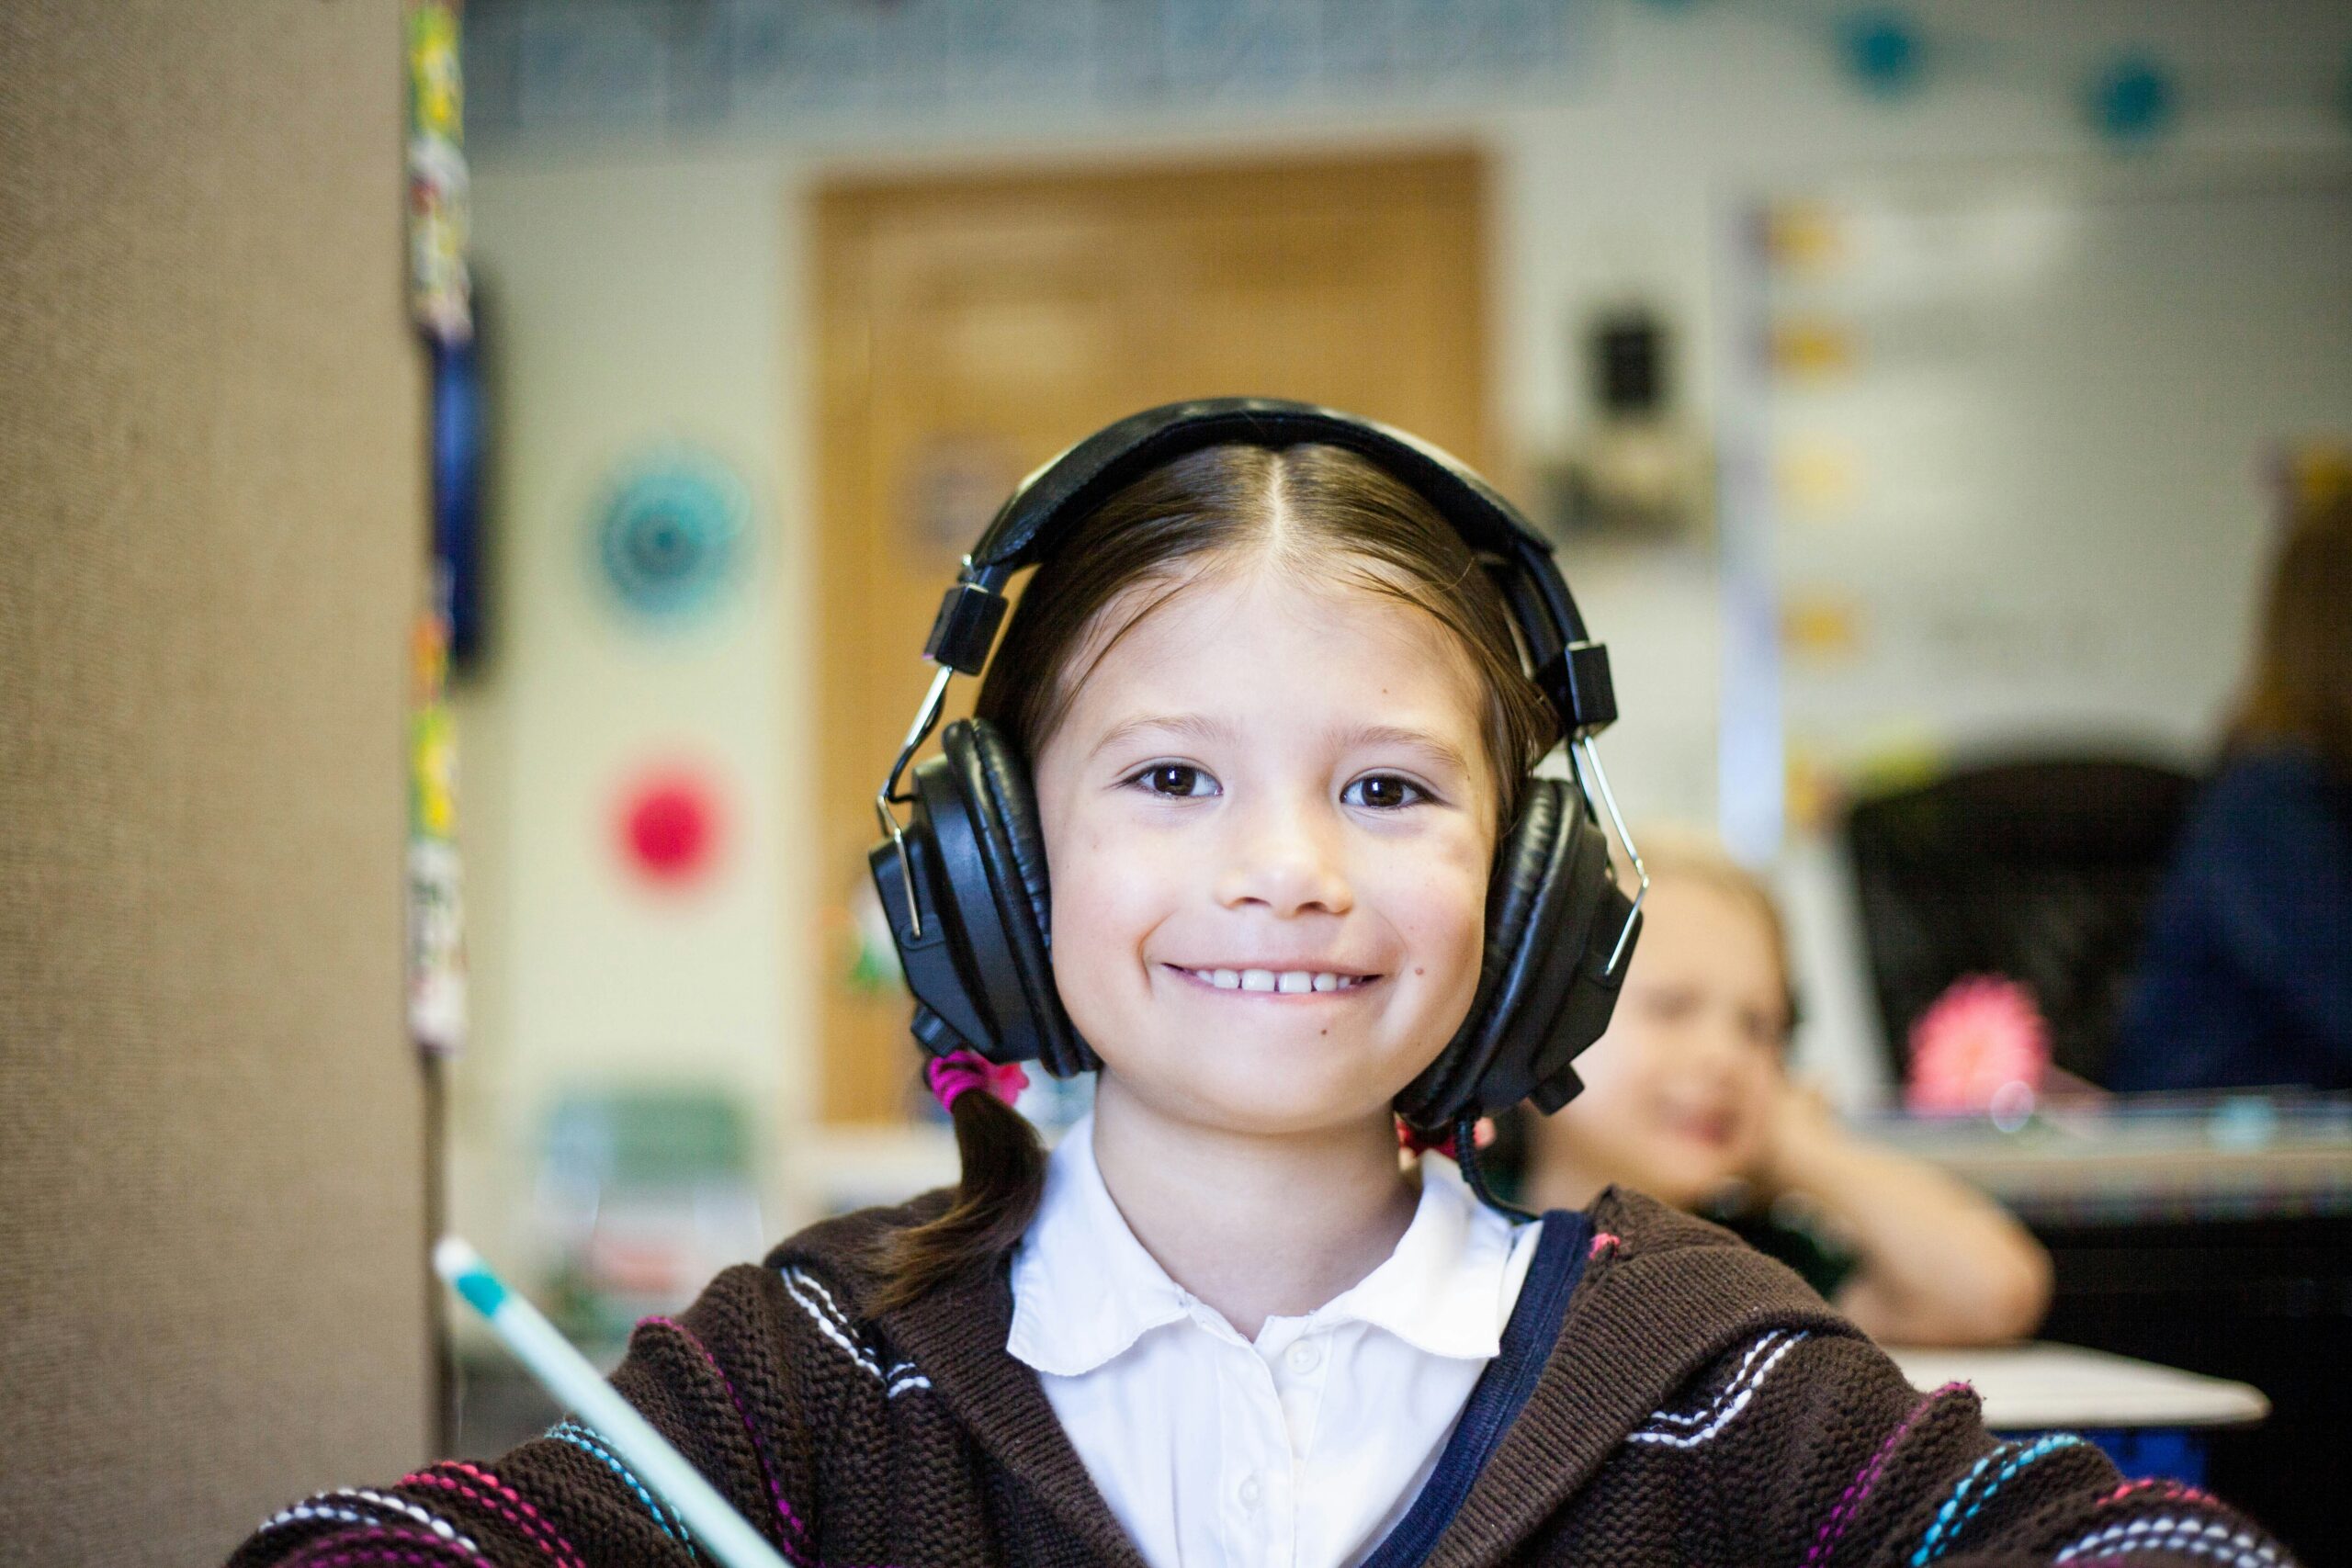 A young student with headphones on in the classroom smiling at the camera